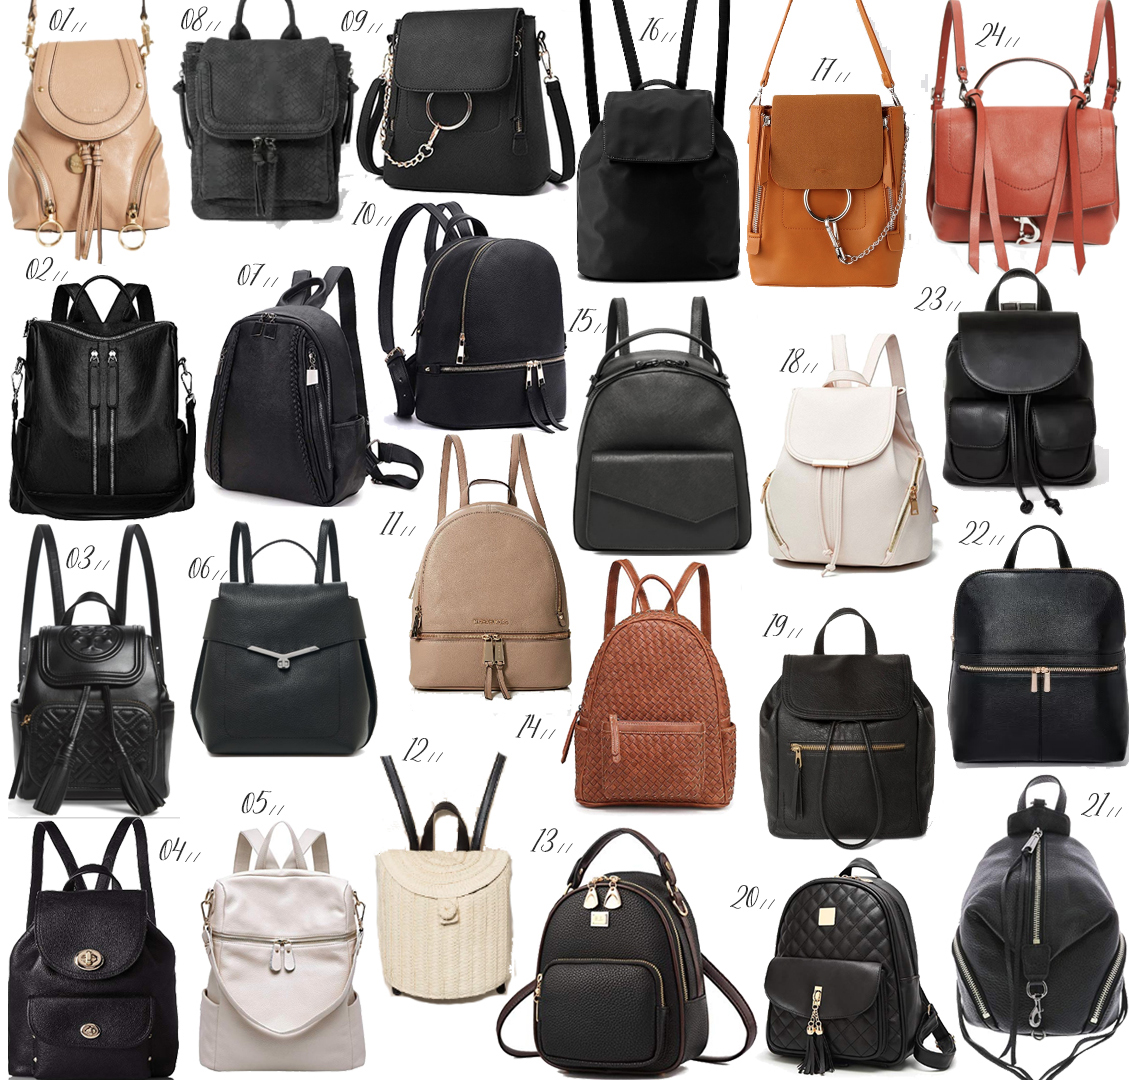 Affordable Mini Backpacks That Are Chic Too! – Sunseeking in Style